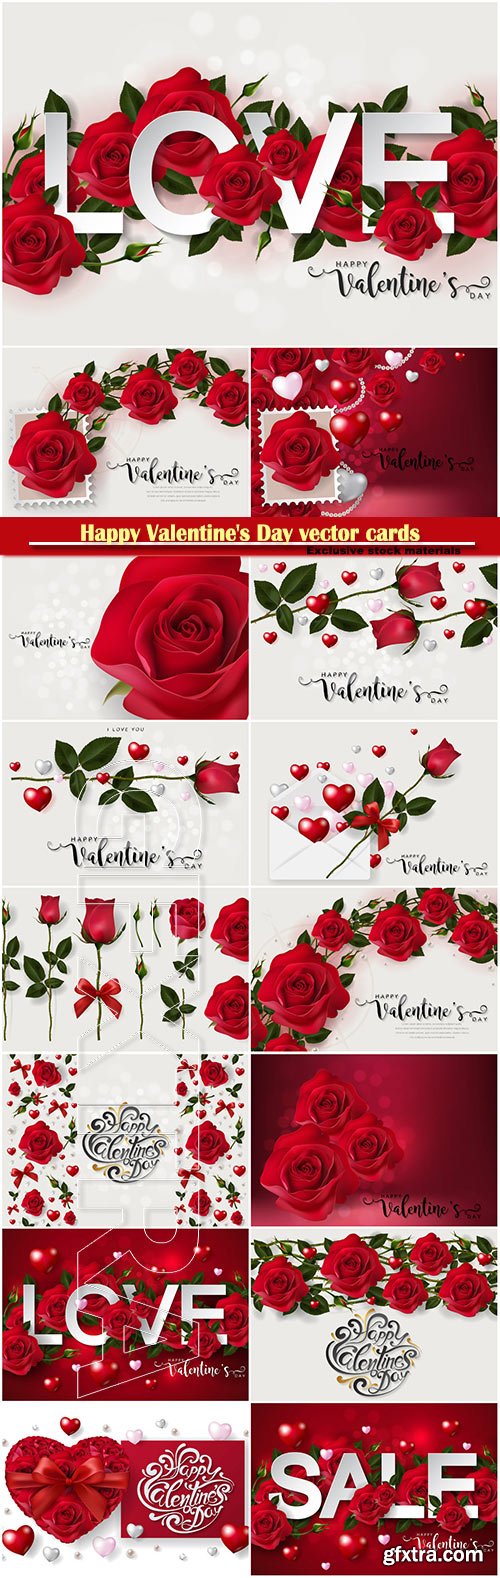 Happy Valentine\'s Day vector cards, red roses and hearts, romantic backgrounds